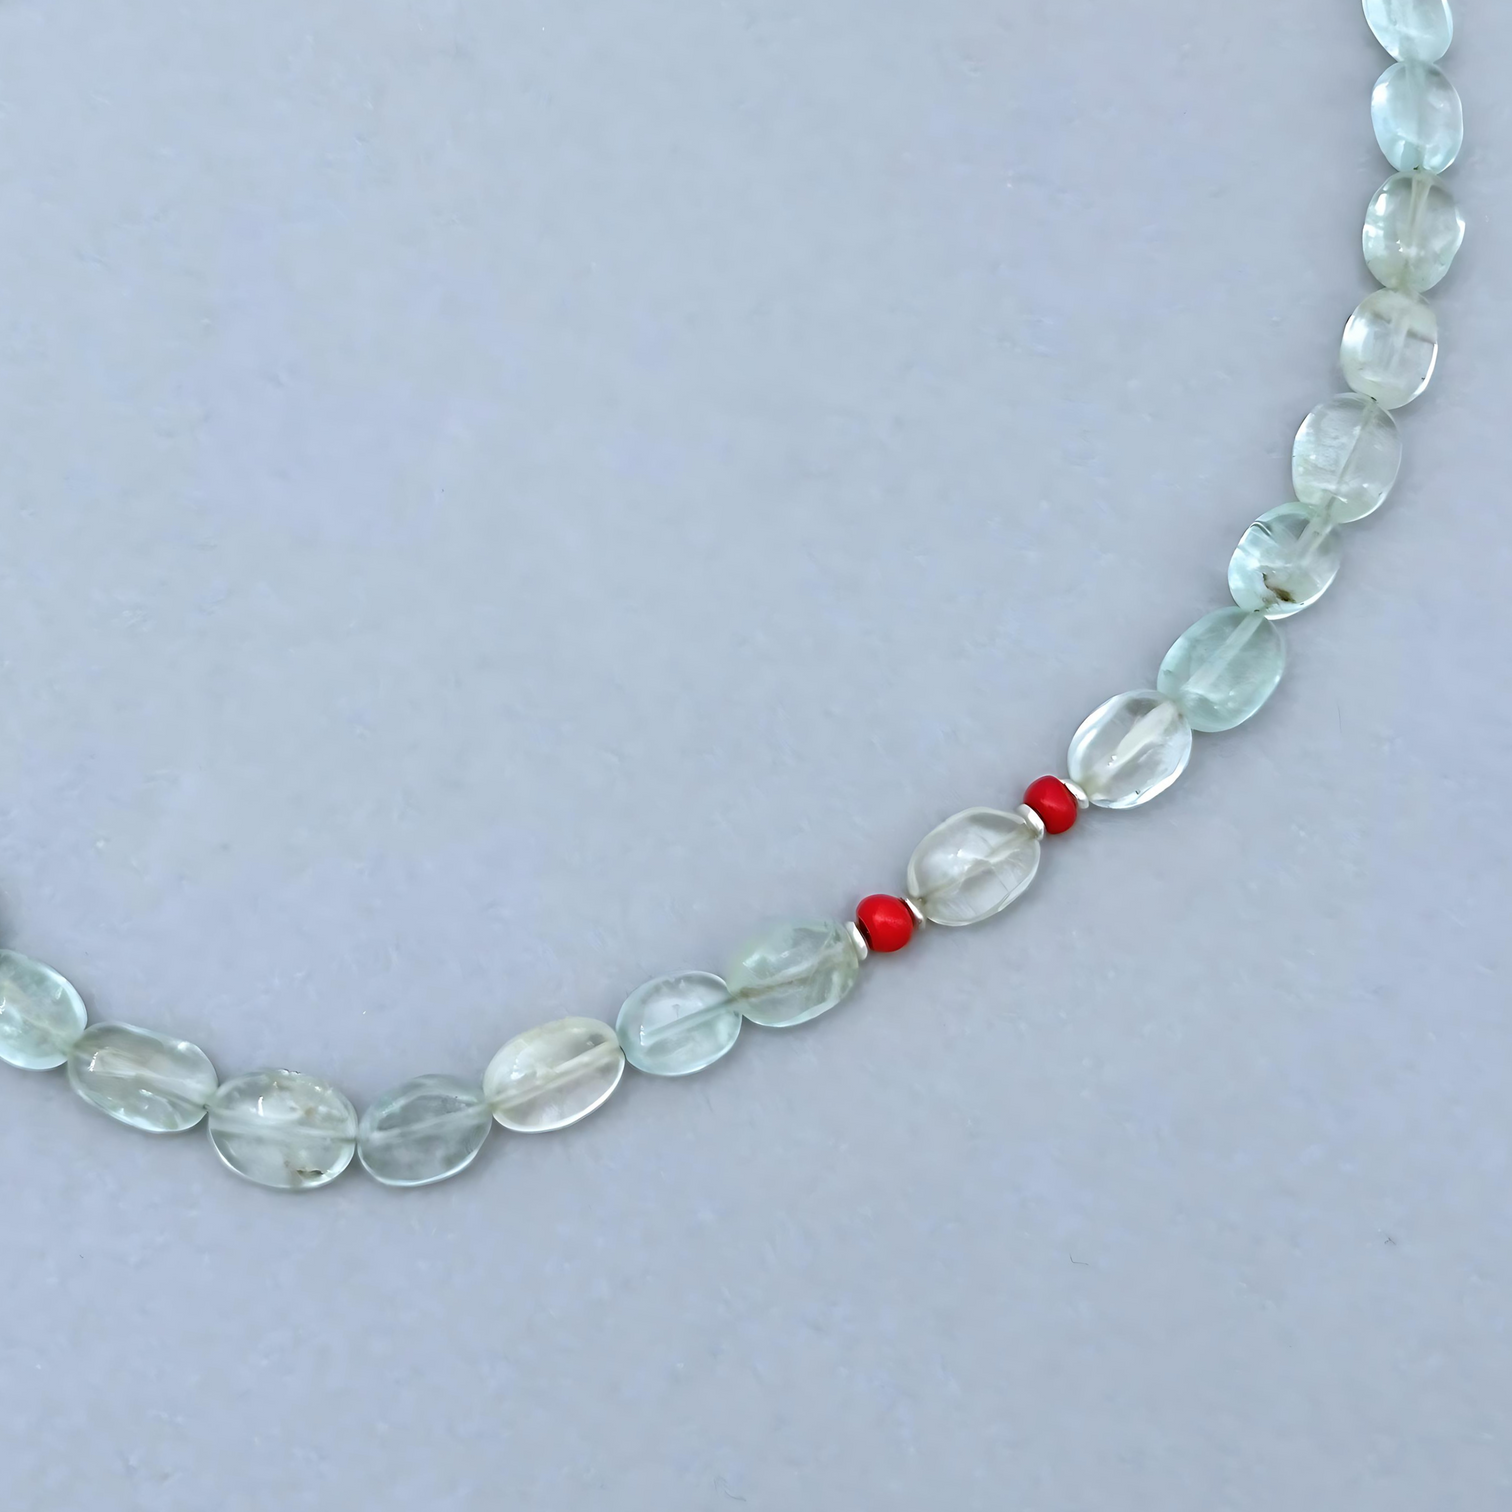 The Le BijouBijou Gemma Necklace is a delicate beauty. Made with oval-shaped pale blue Aquamarines and a touch of Coral.